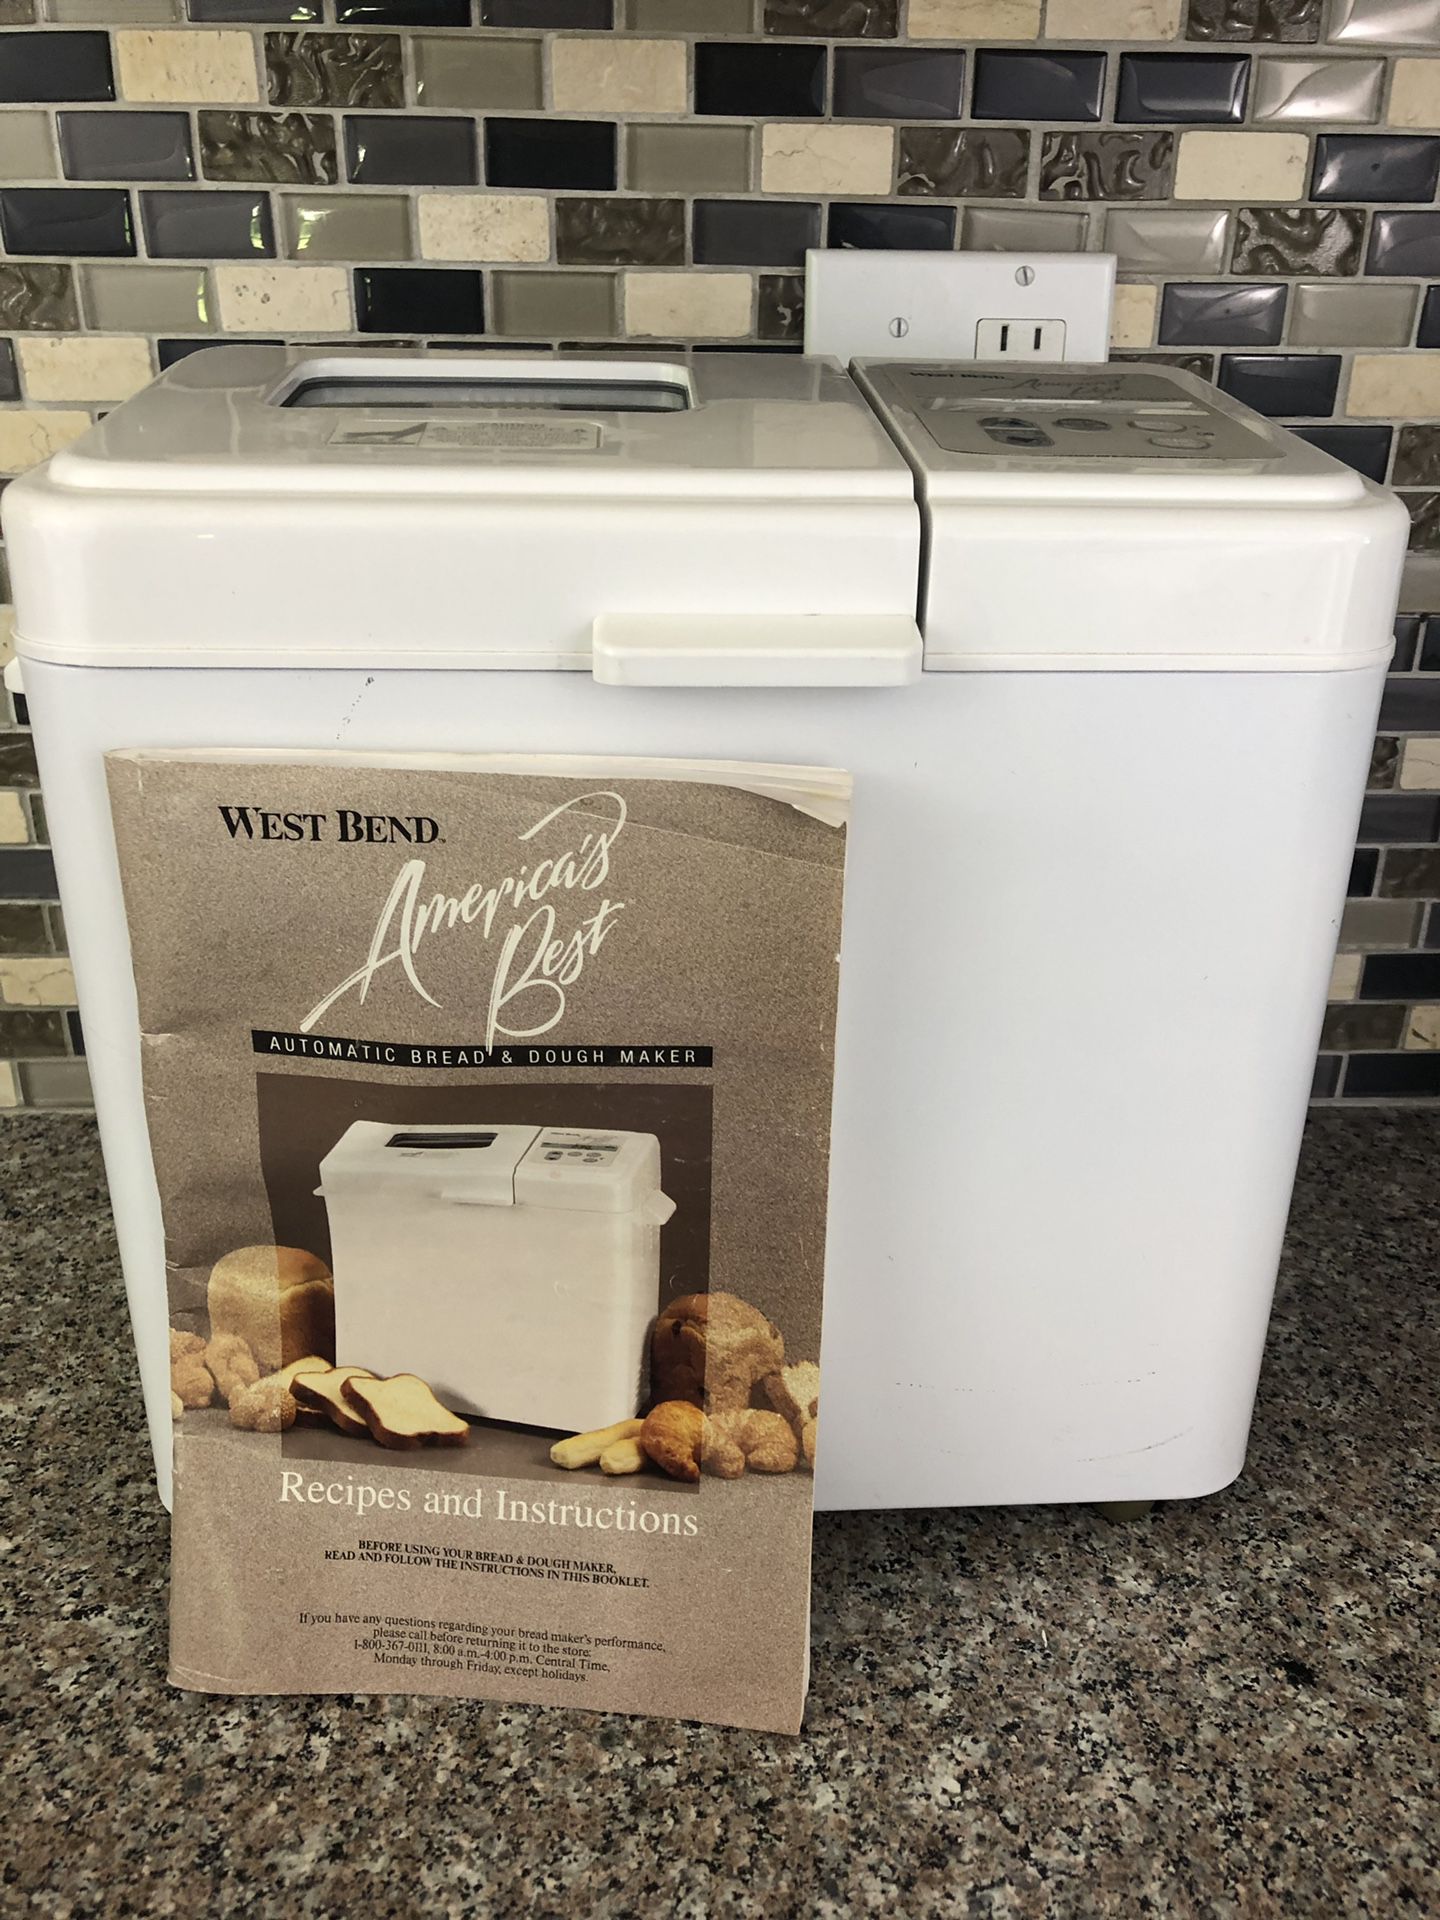 West Bend Made in USA Automatic Breadmaker 120V 575 America’s Best w/Manual